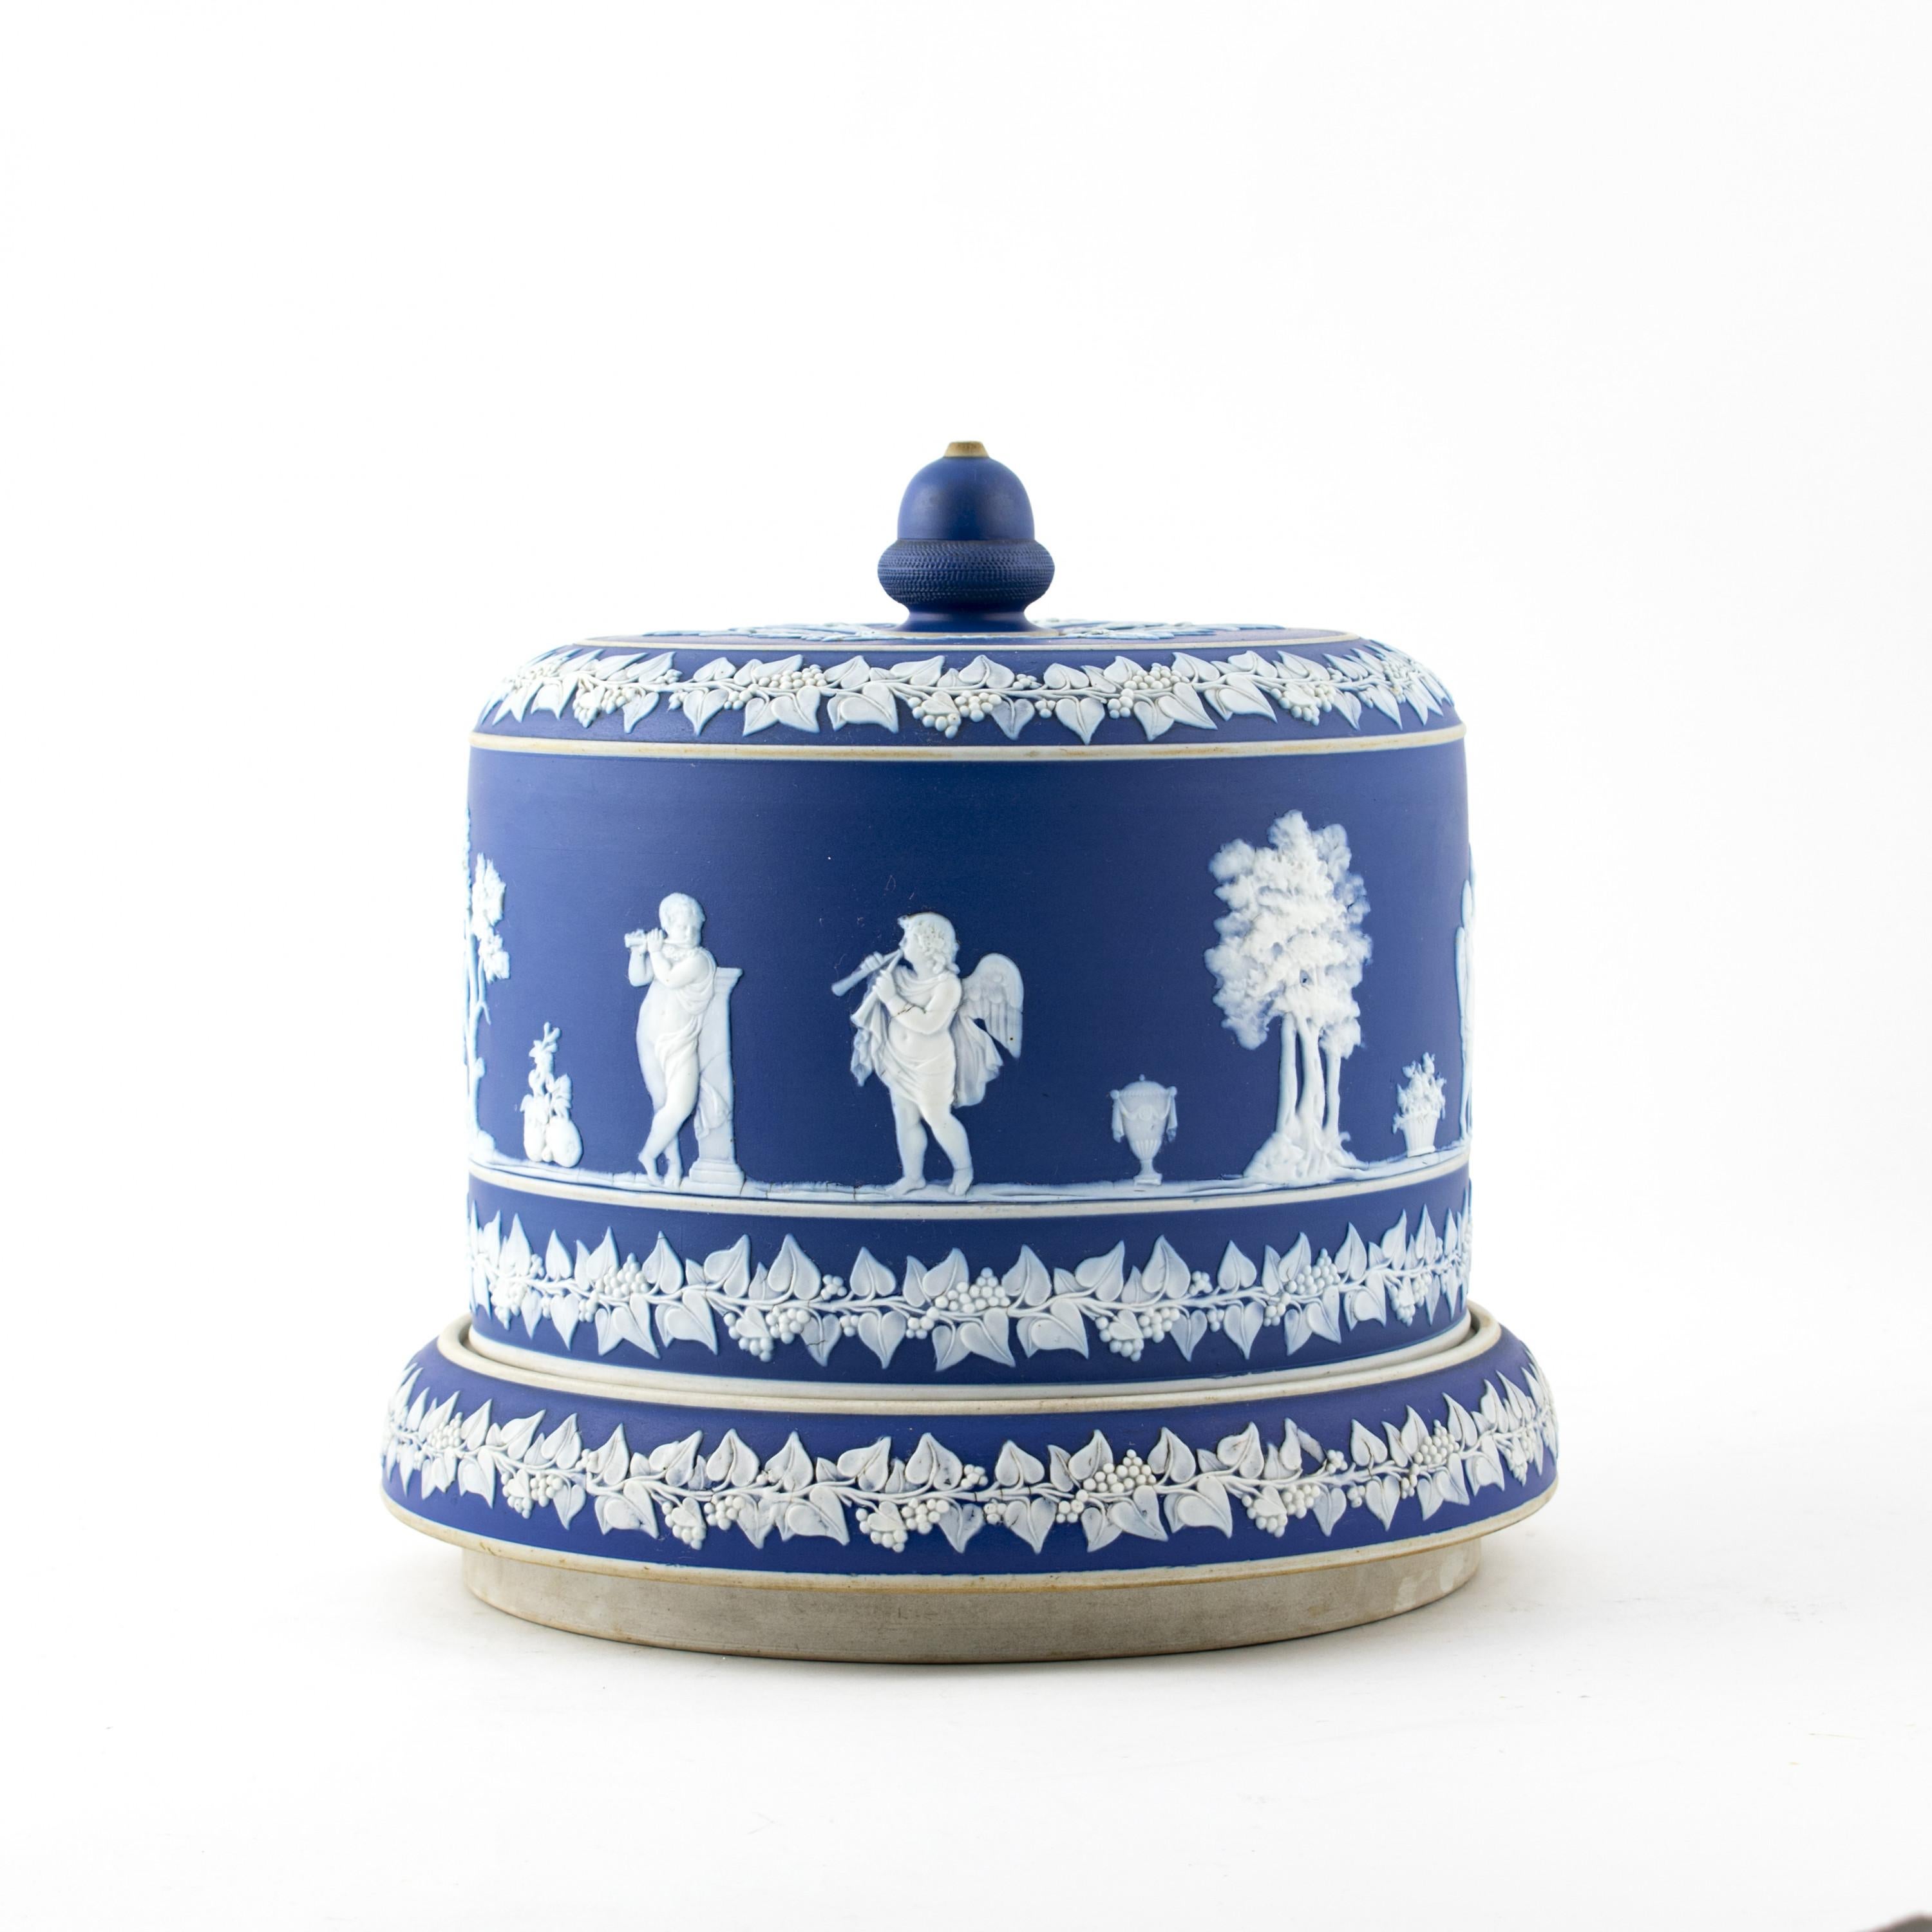 Large English Wedgwood Jasperware cheese dome.
Jasperware is usually described as stoneware, with an unglazed matte “biscuit” finish.
Beautiful overall raised neoclassical relief decorations of trees and angles.
Vine leaves and grapes bordering